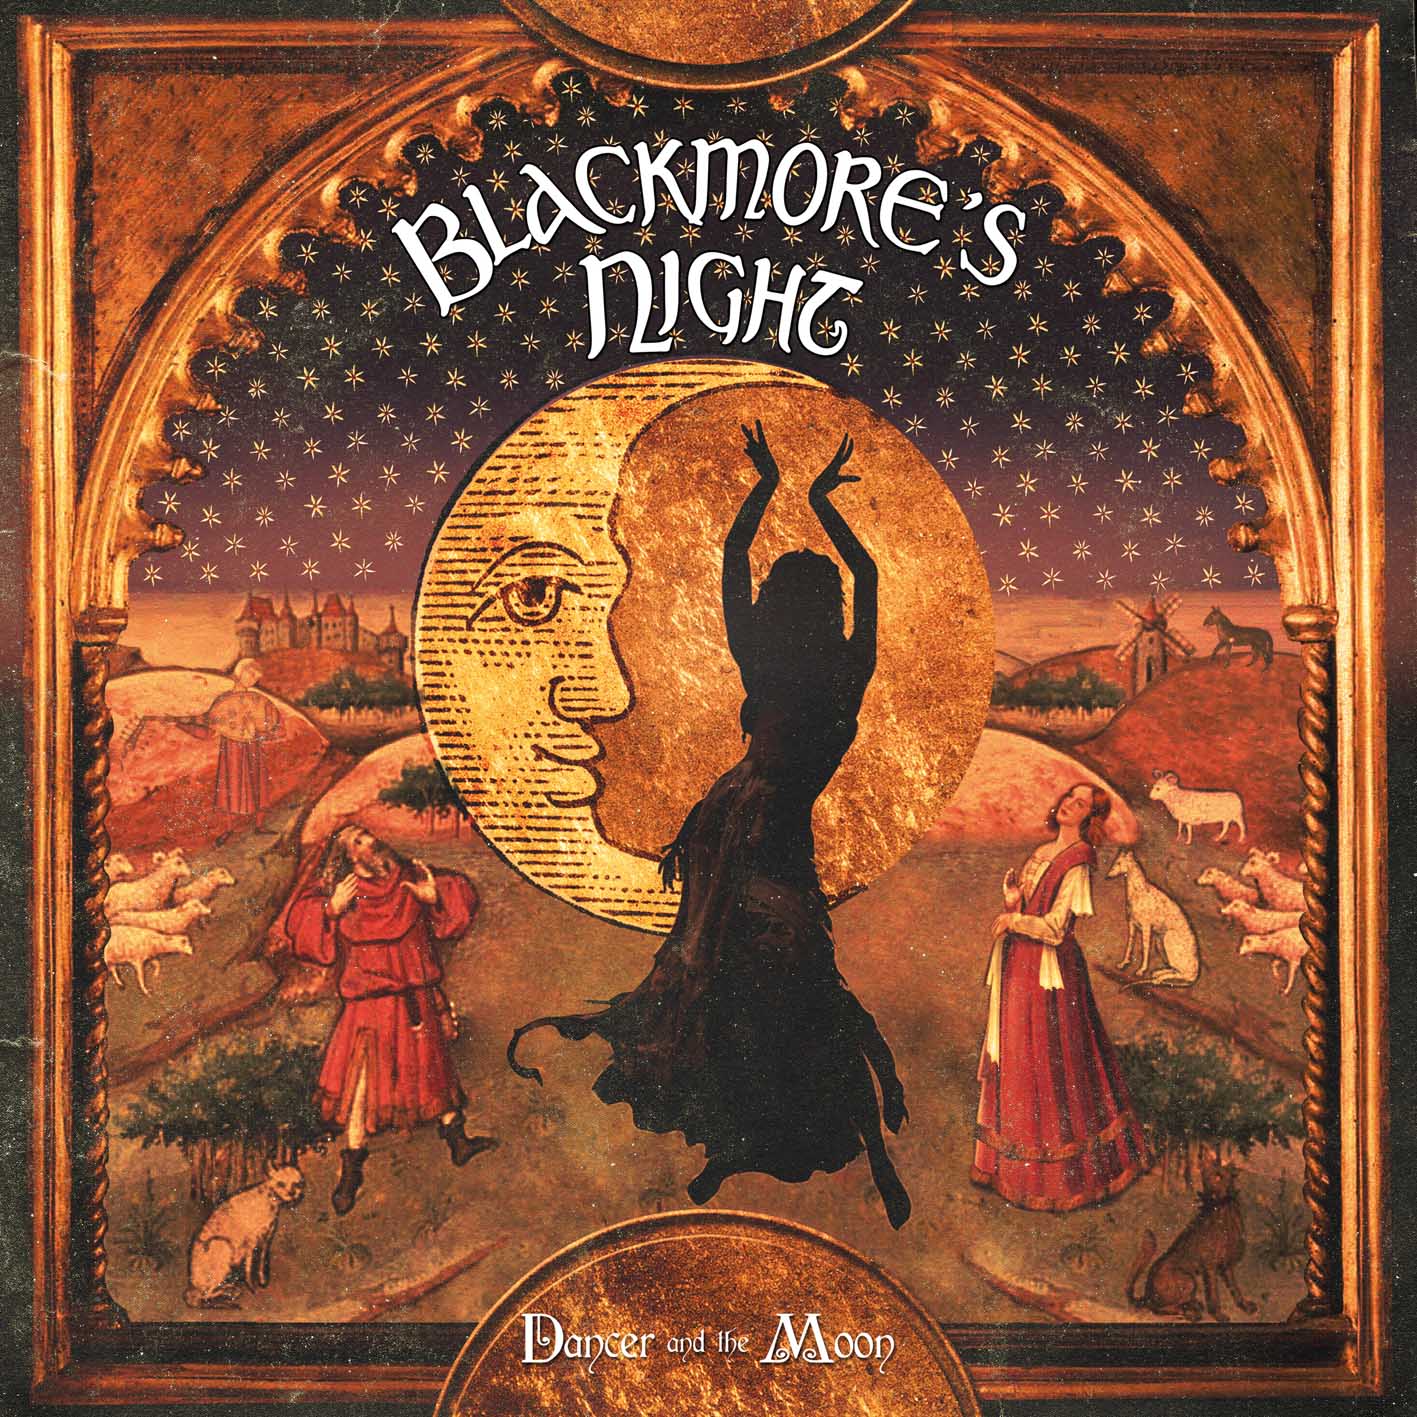 Blackmore’s Night - Dancer and the Moon